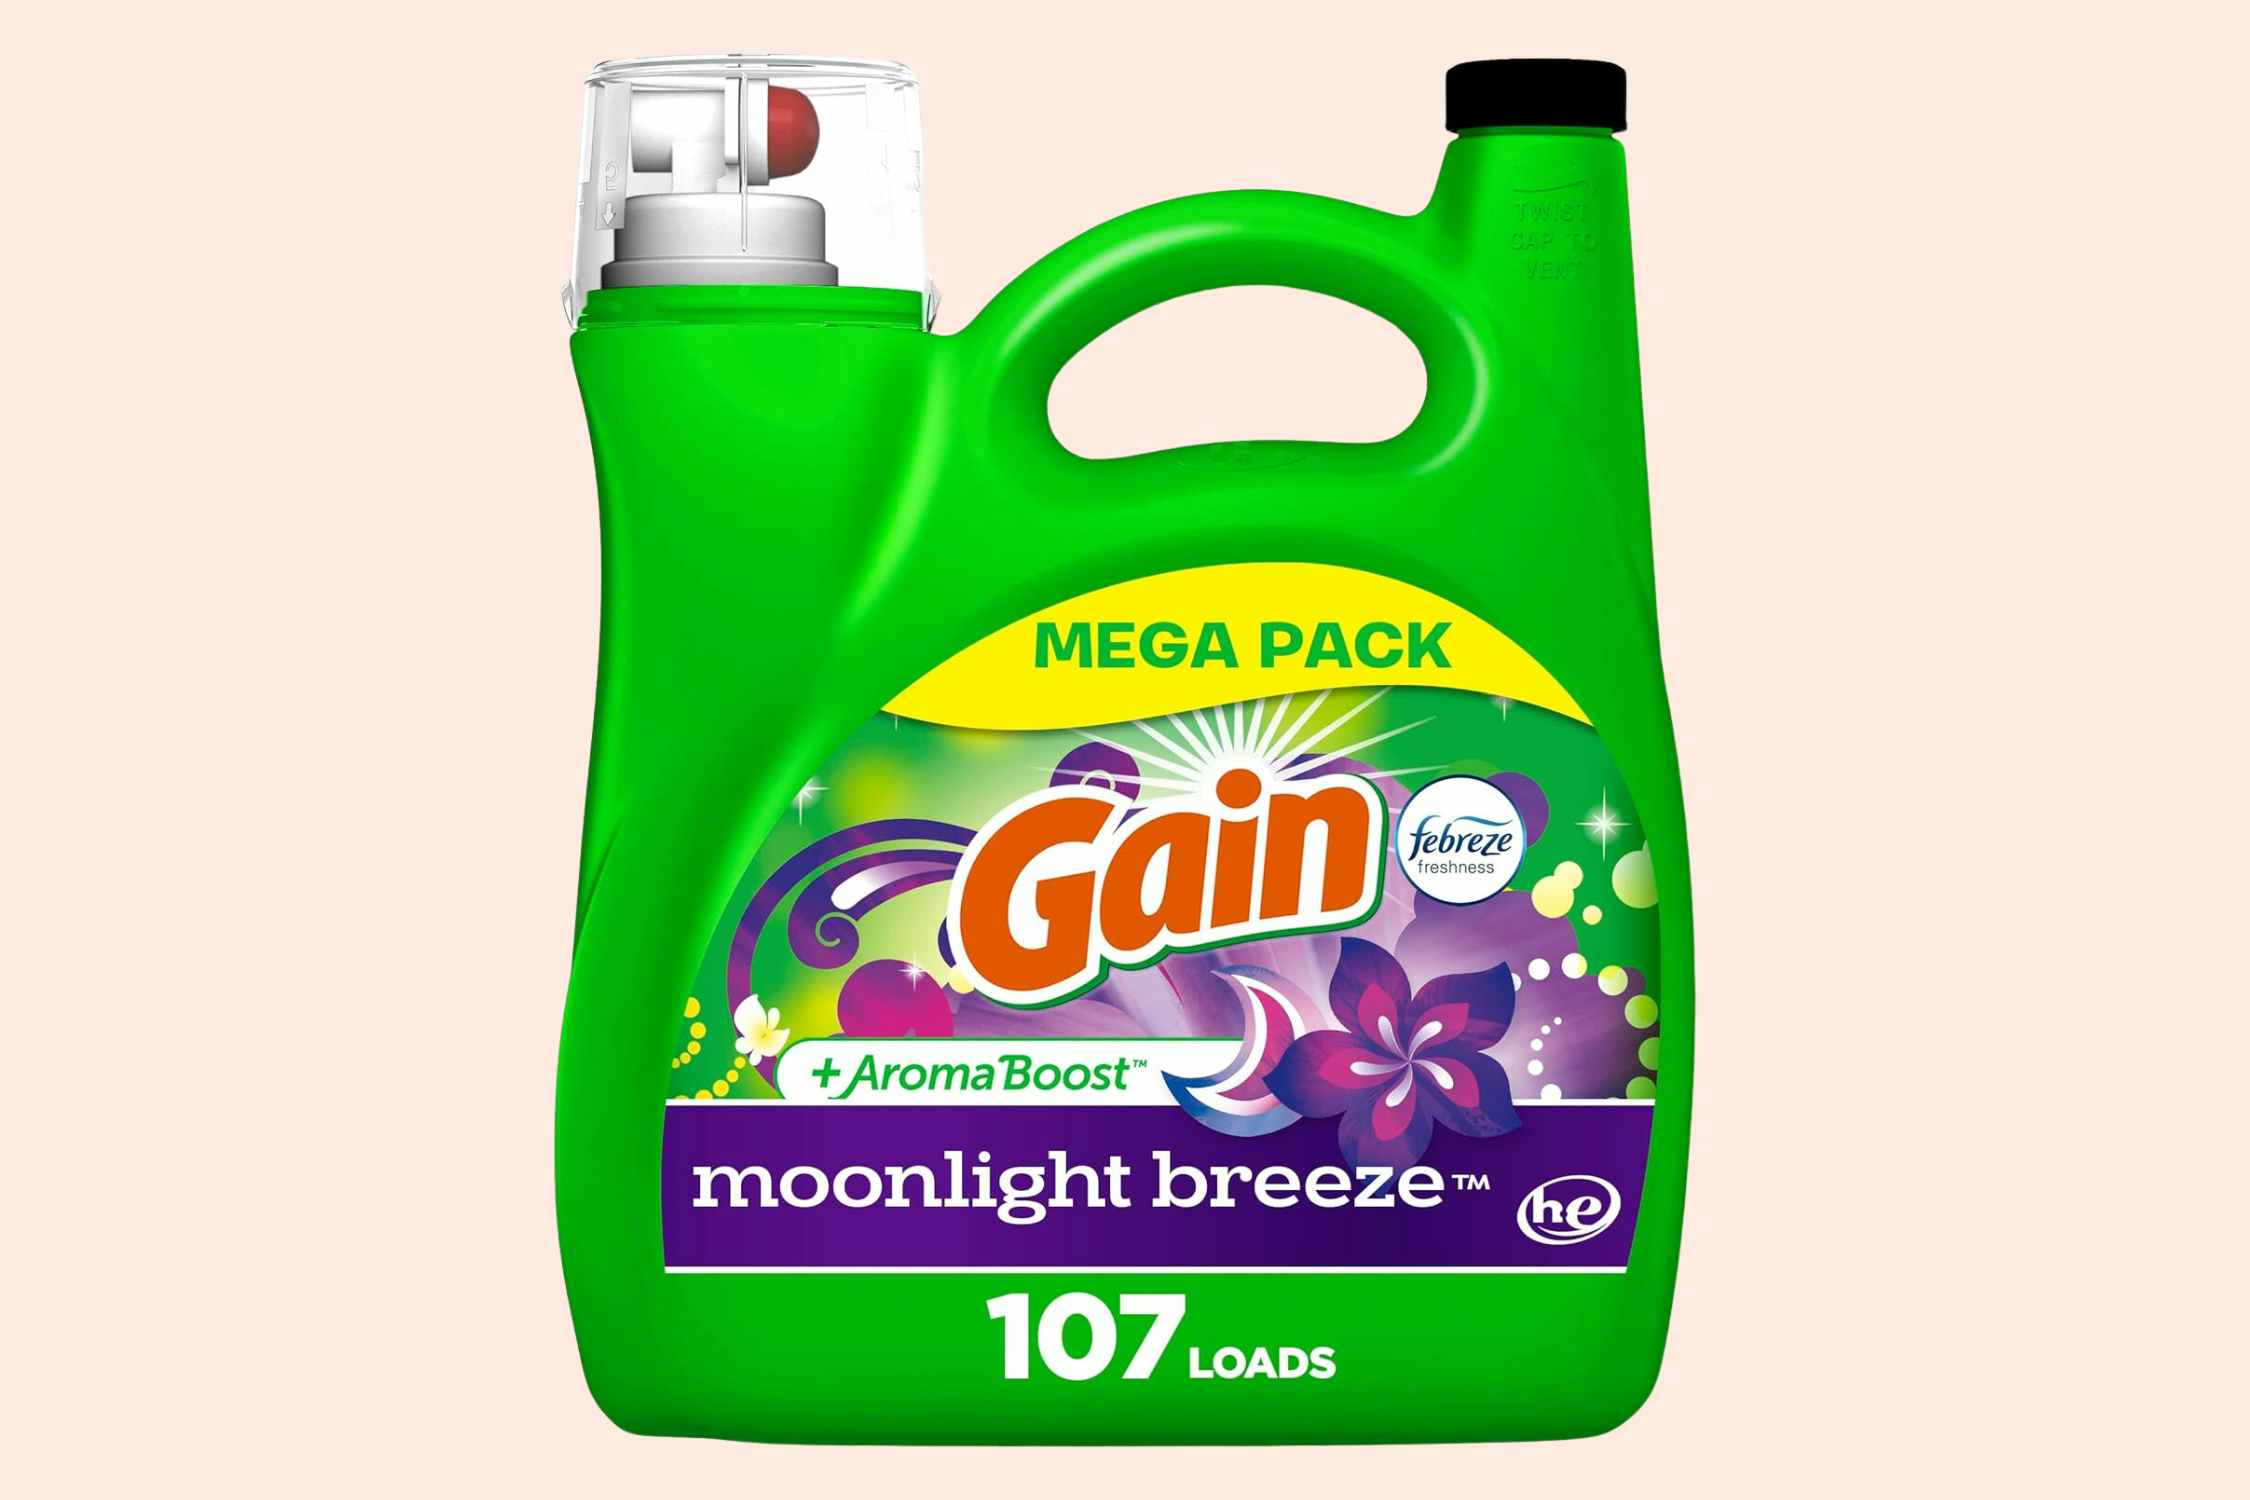 Gain + Aroma Boost 154-Ounce Laundry Detergent, $9.23 on Amazon